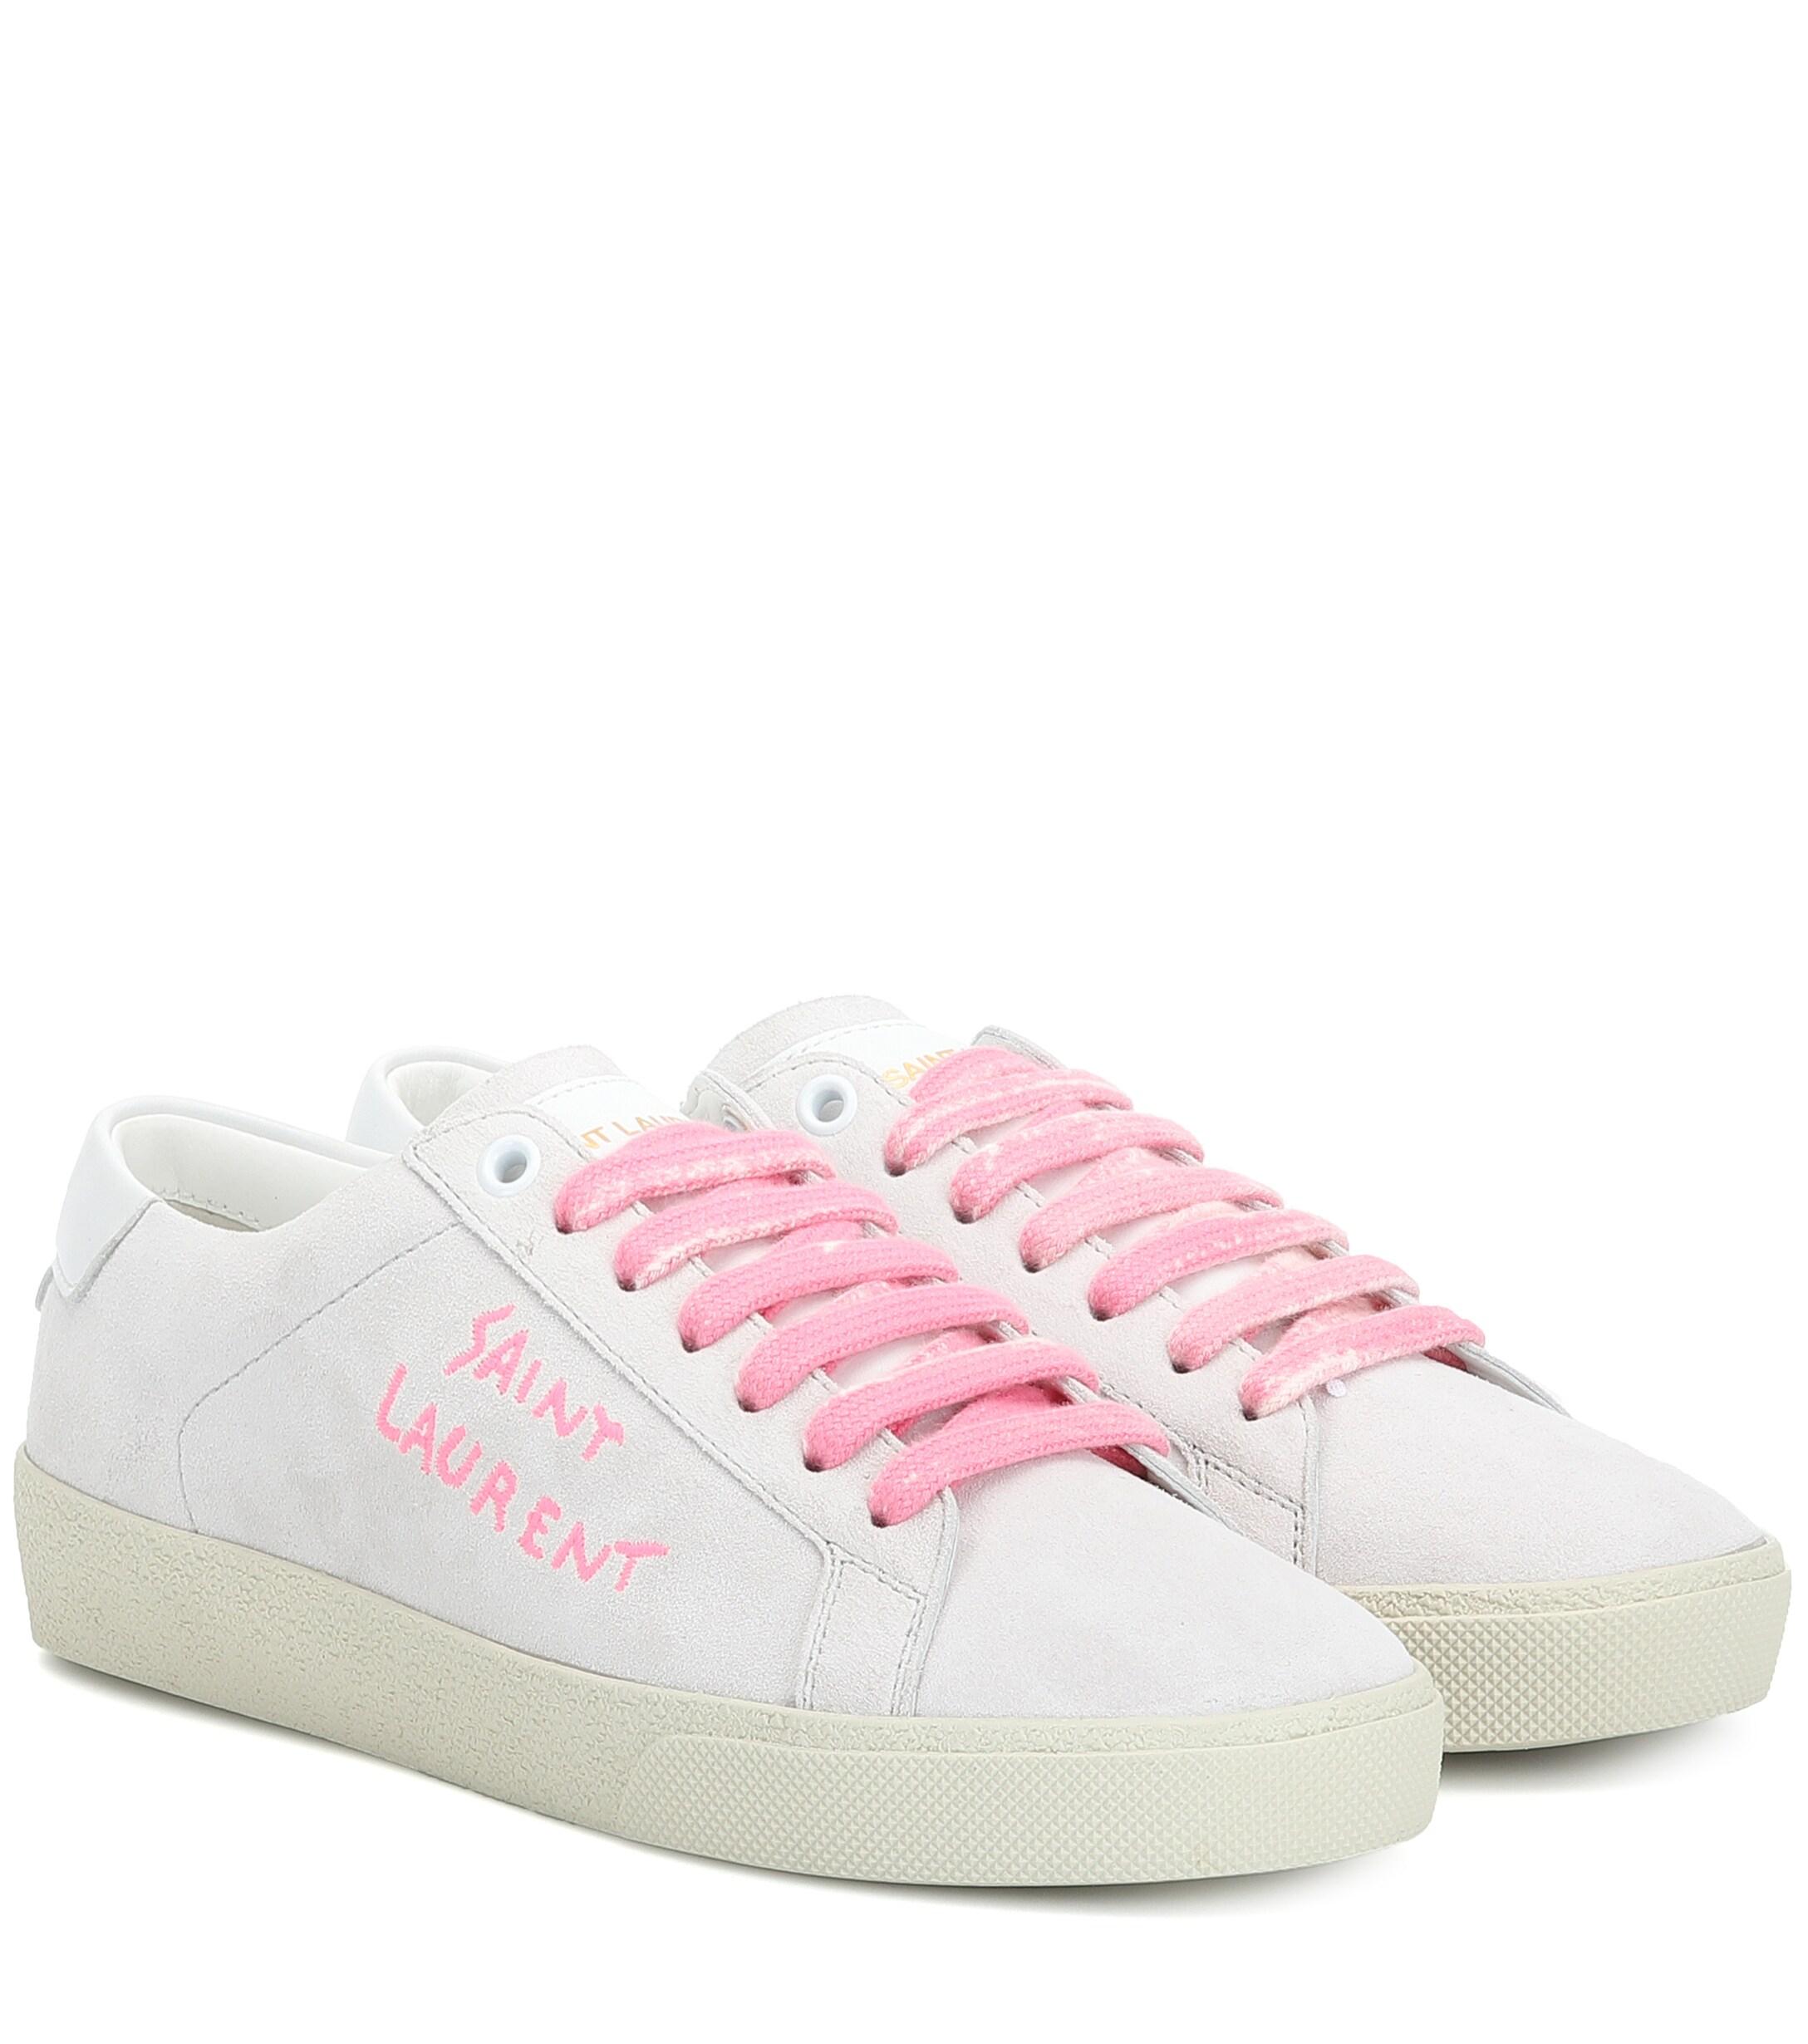 Saint Laurent Court Classic Sl/06 Suede Sneakers in White - Save 39% - Lyst